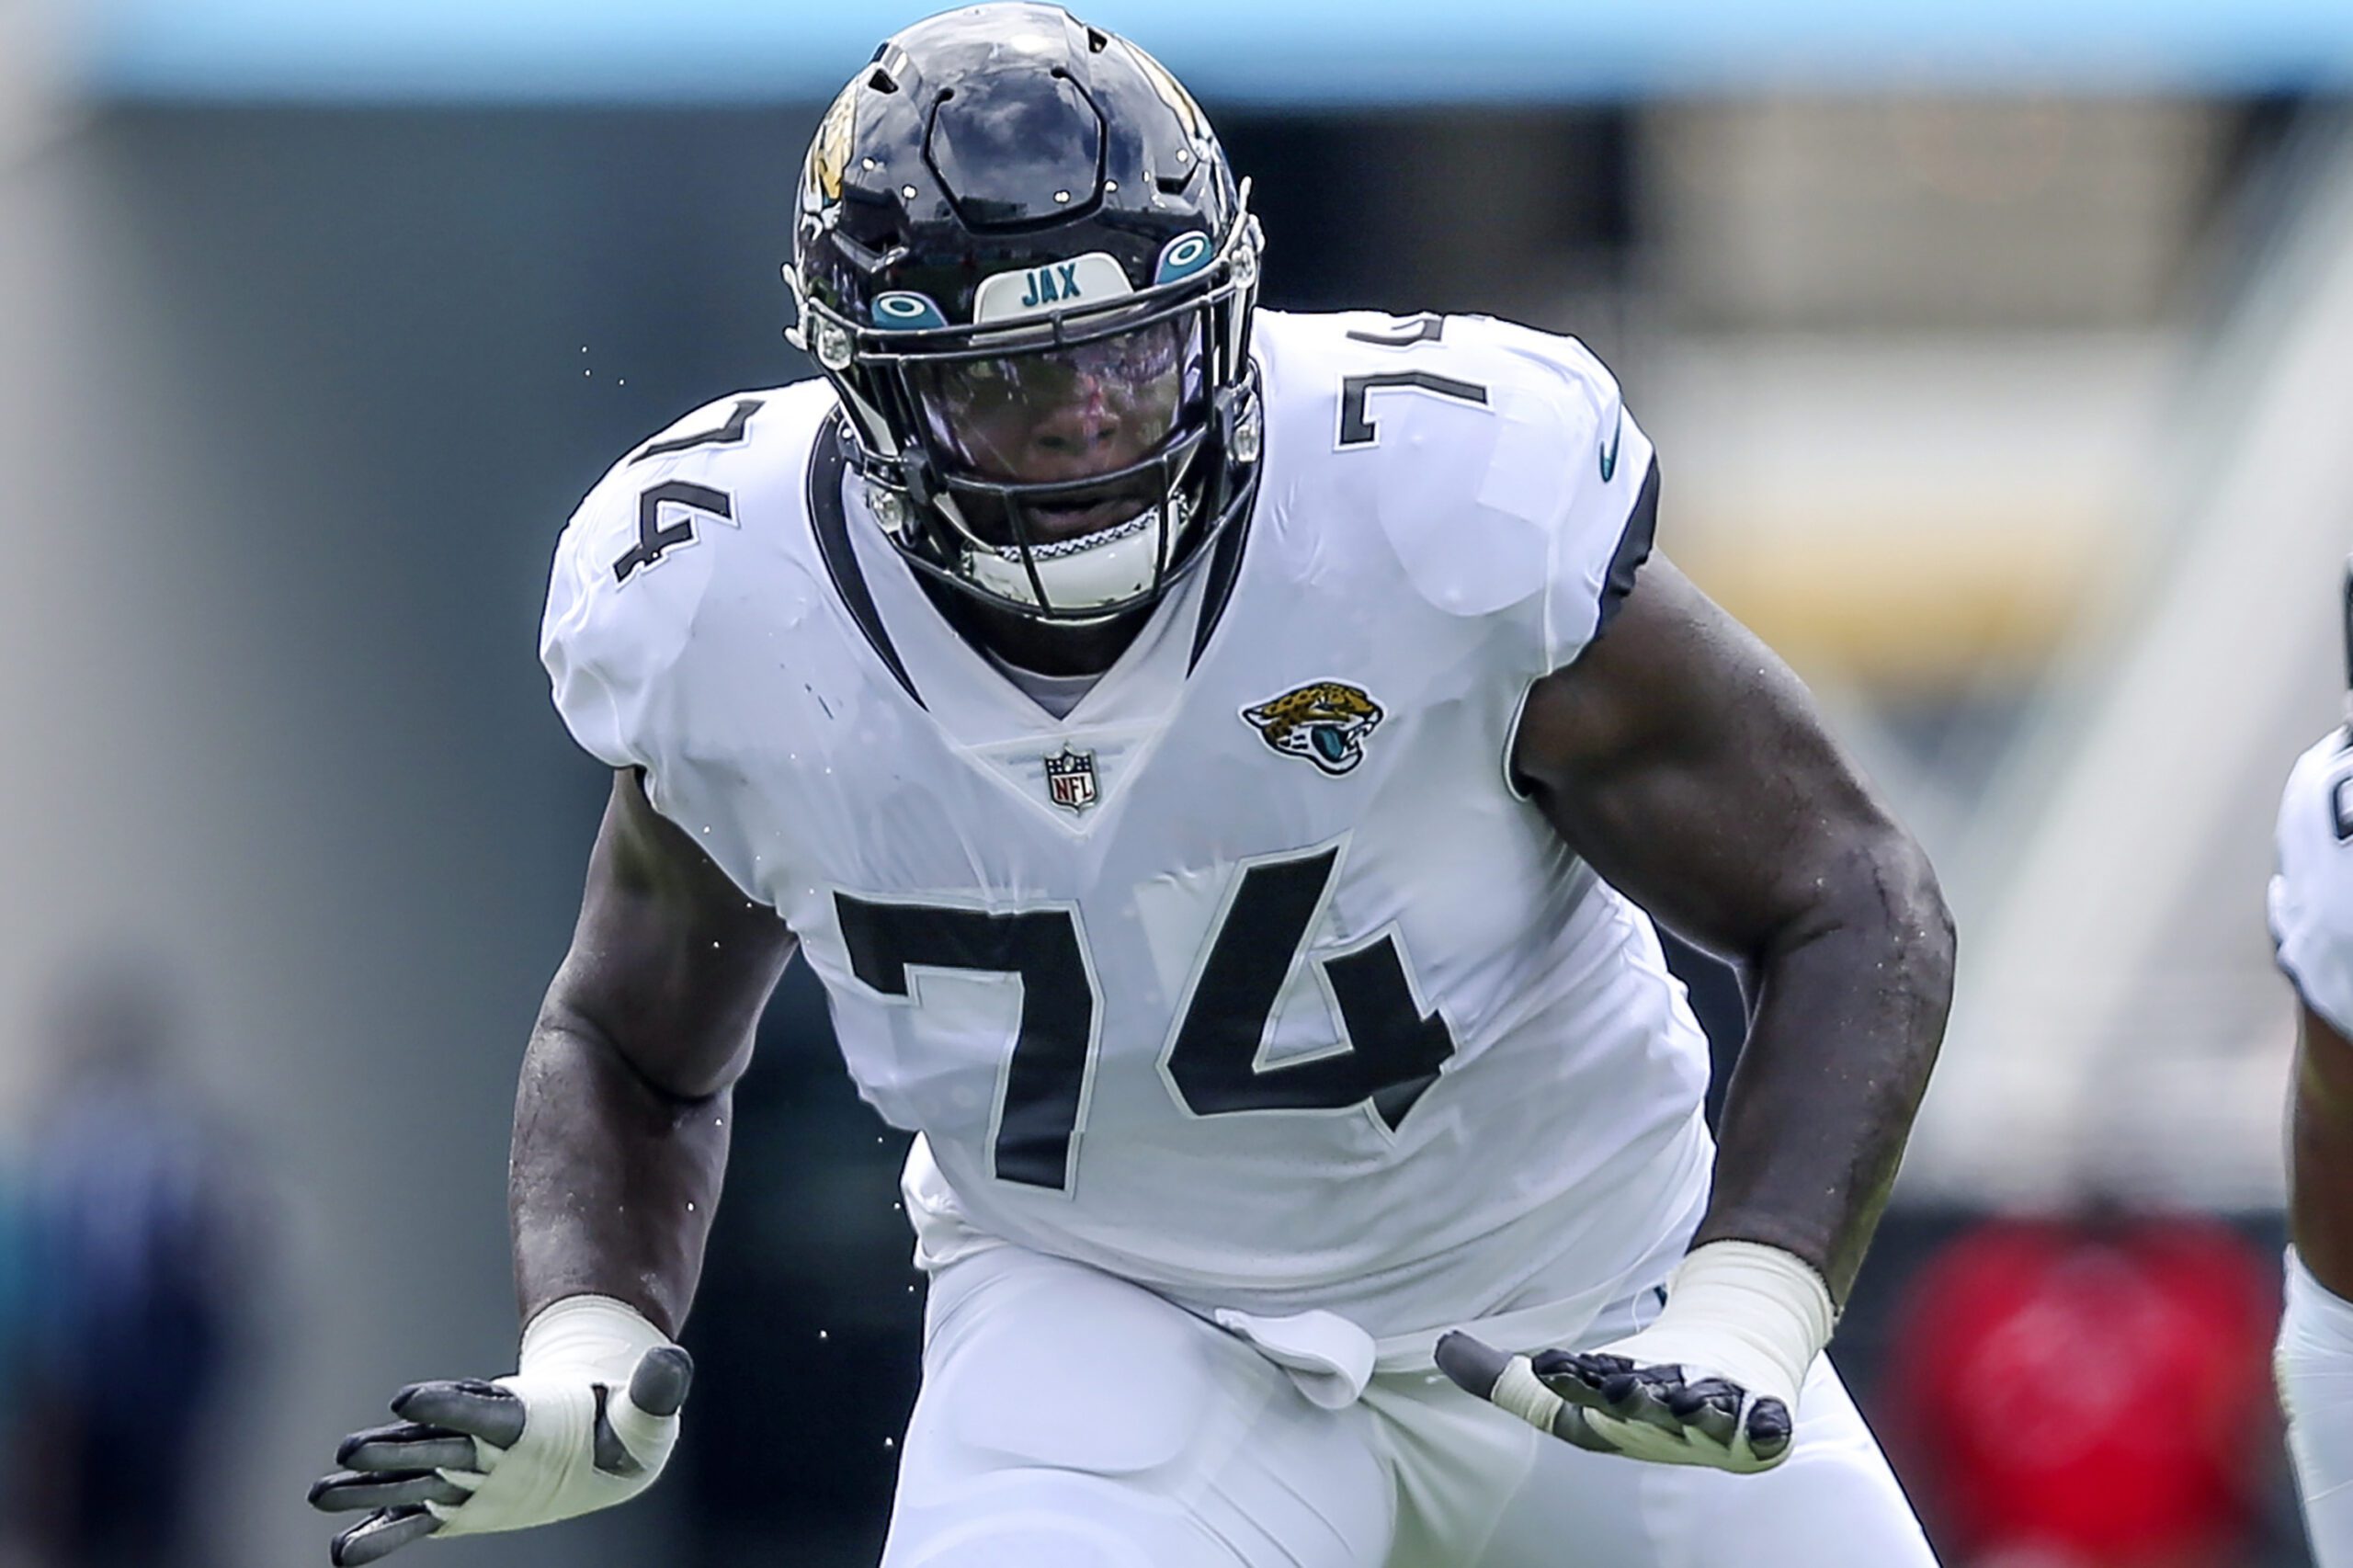 Jaguars OT Cam Robinson is facing a multi-game suspension for PEDs